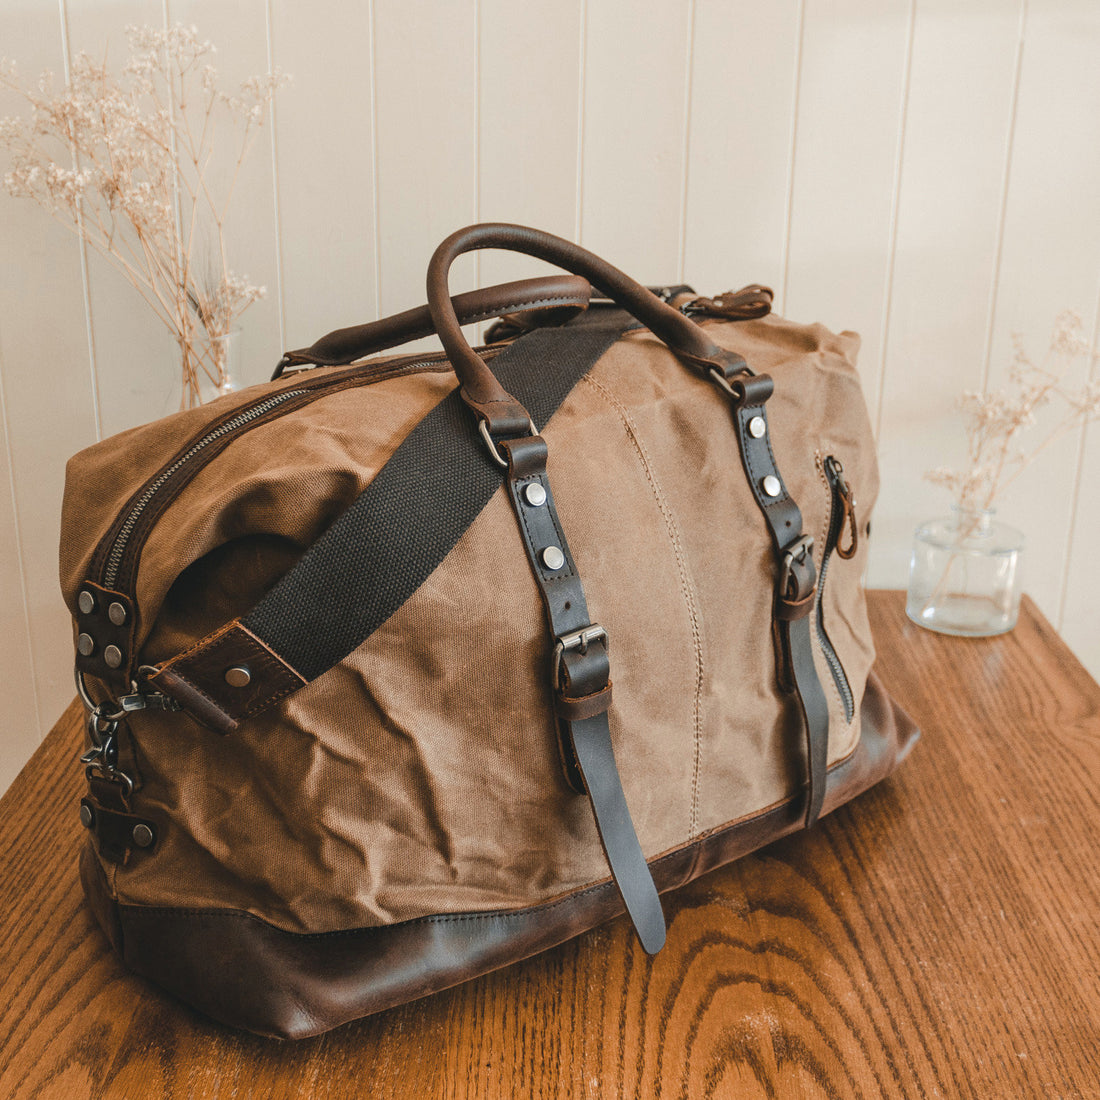 Waxed Canvas vs. Leather Travel Bags: Which One is Right for You? - Woosir